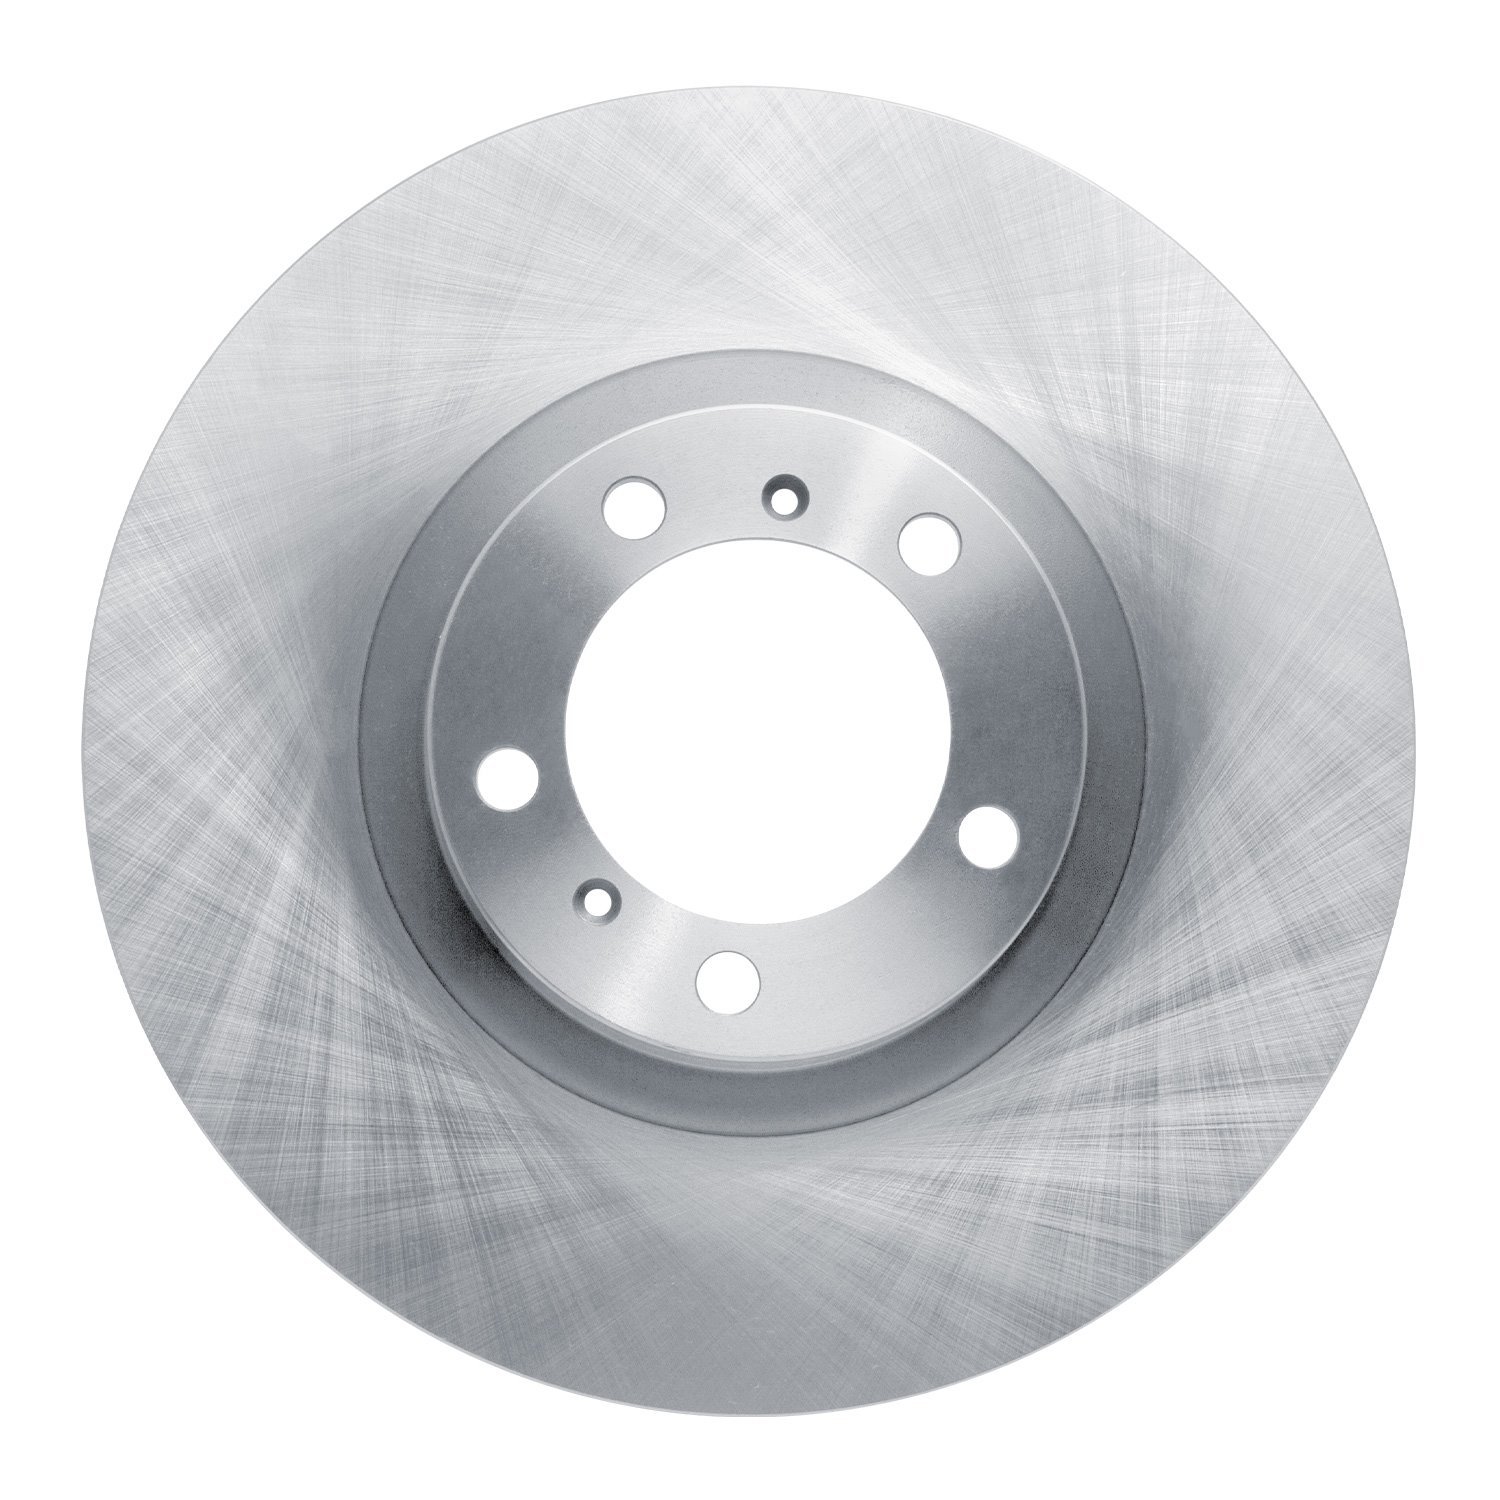 600-02085D Brake Rotor, Fits Select Multiple Makes/Models, Position: Right Front